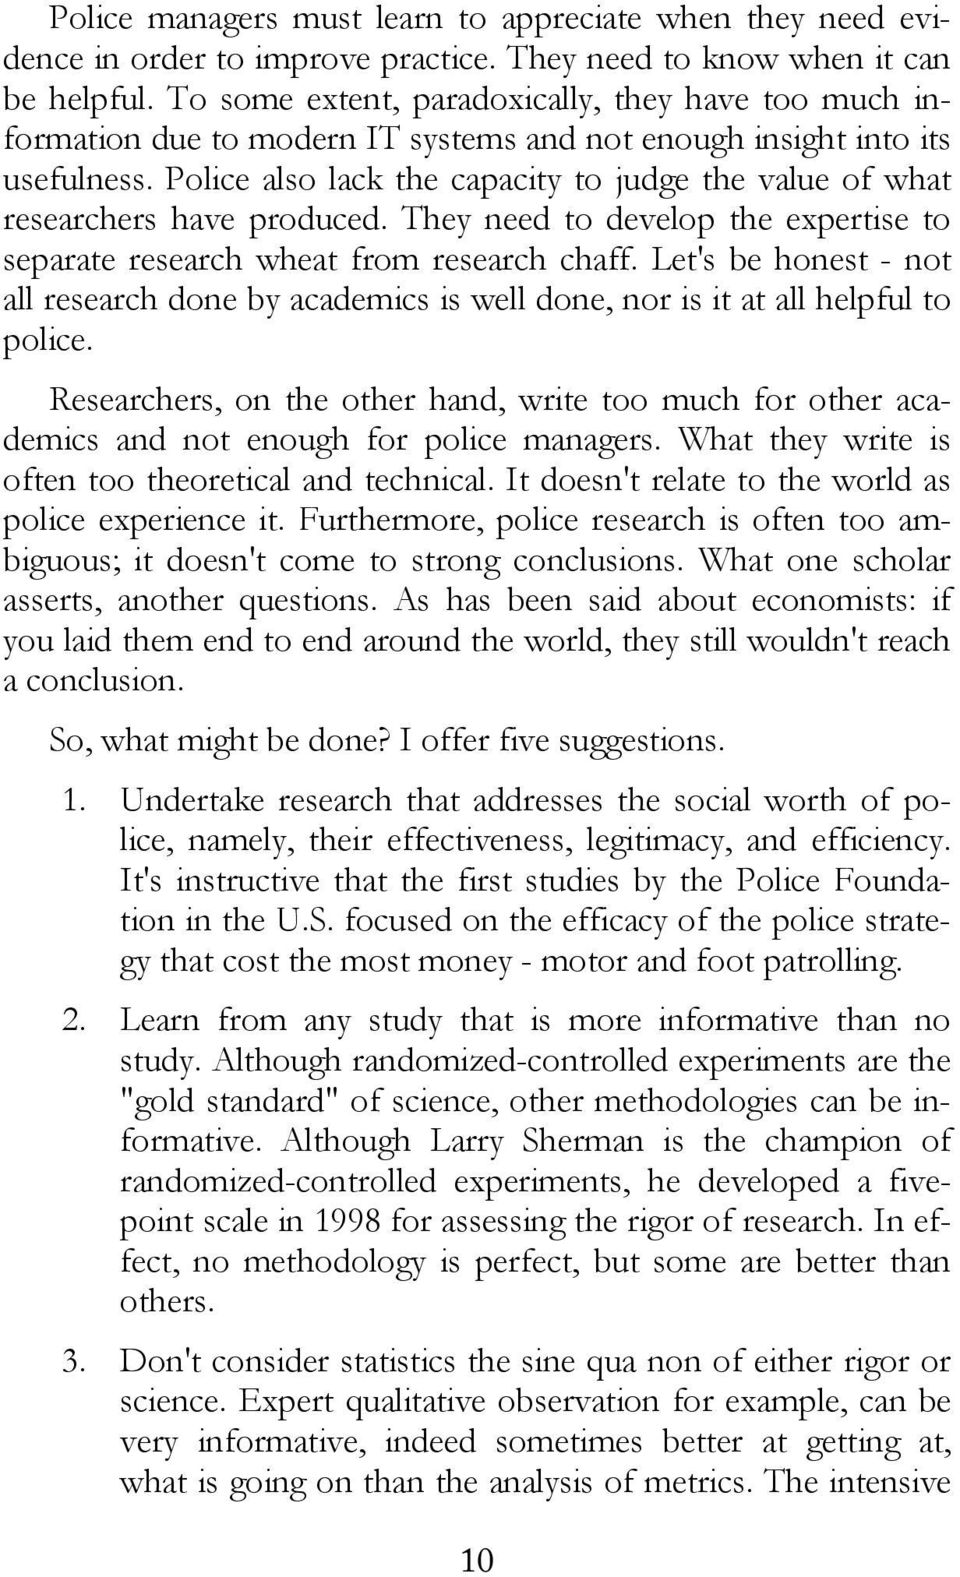 Police also lack the capacity to judge the value of what researchers have produced. They need to develop the expertise to separate research wheat from research chaff.